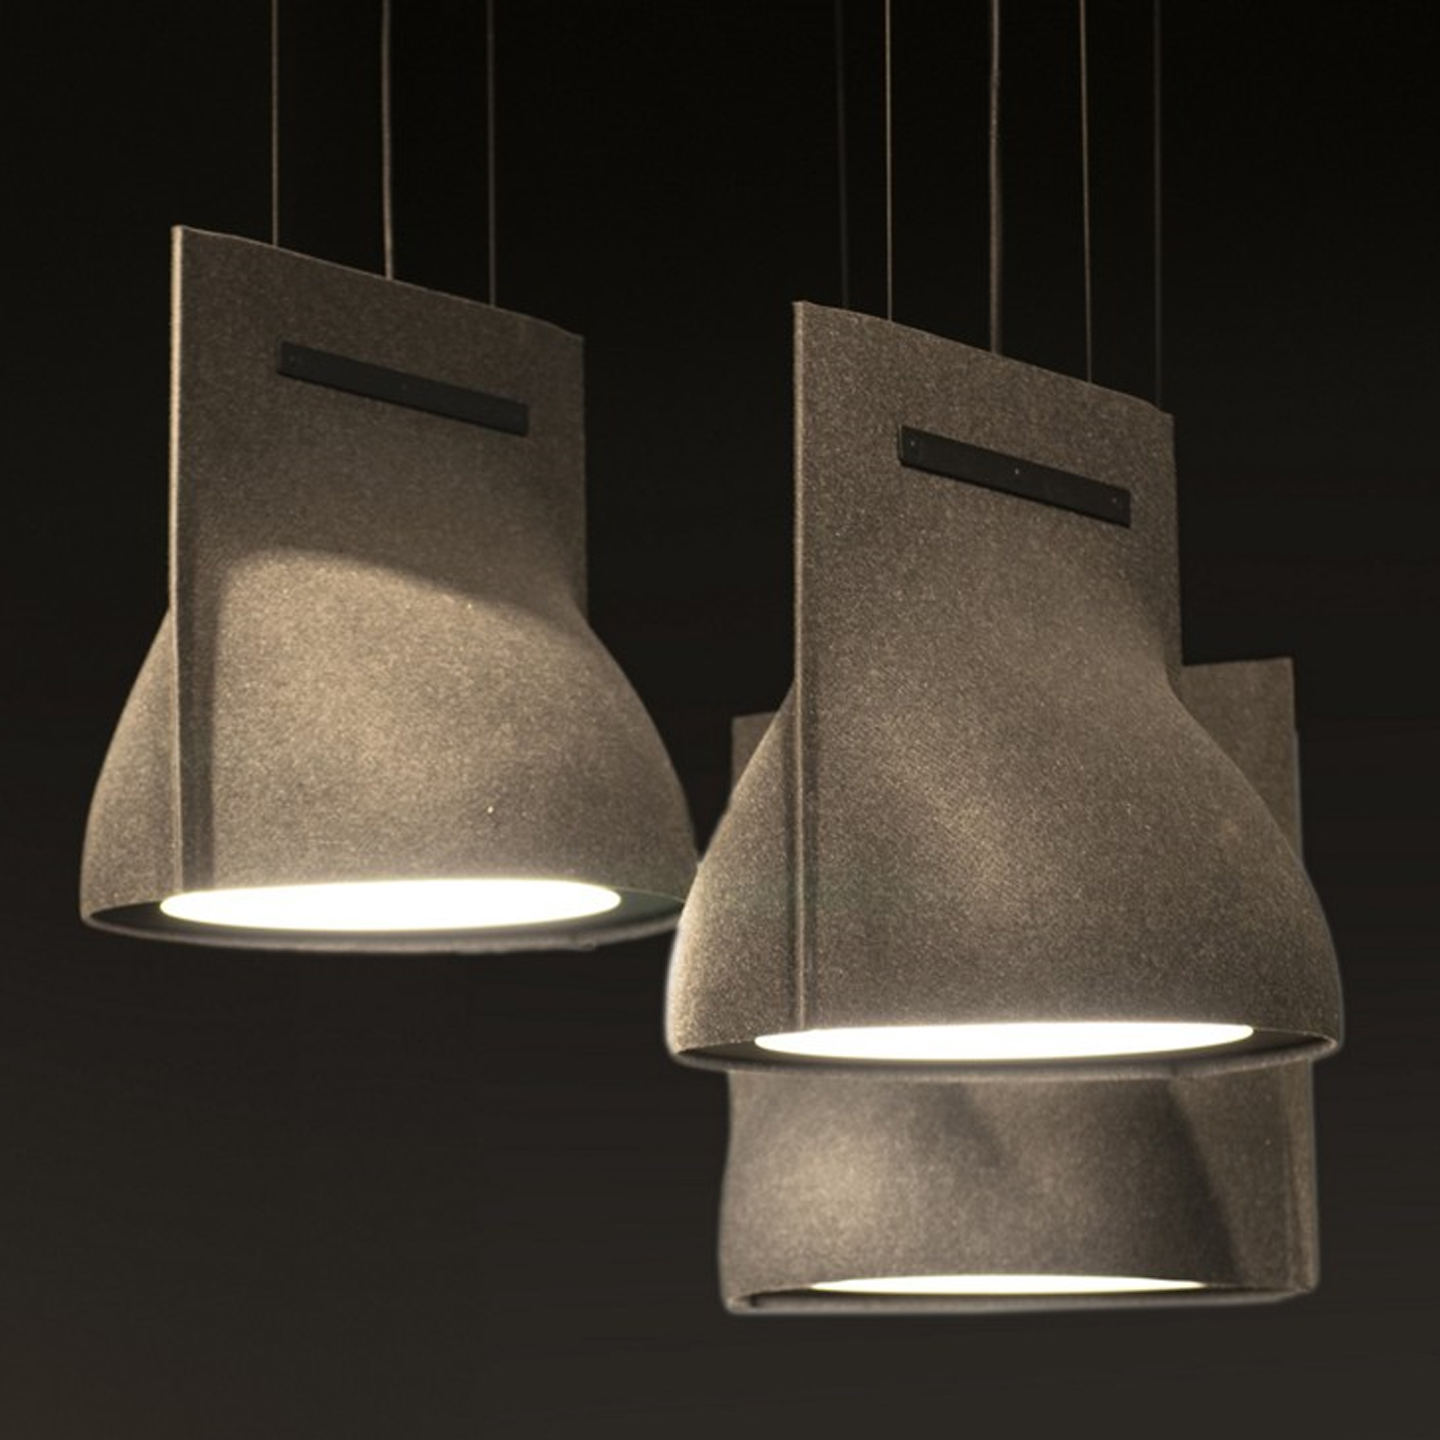 Haworth BuzziBell Lighting in felt in dark room with 3 lights hanging down from ceiling